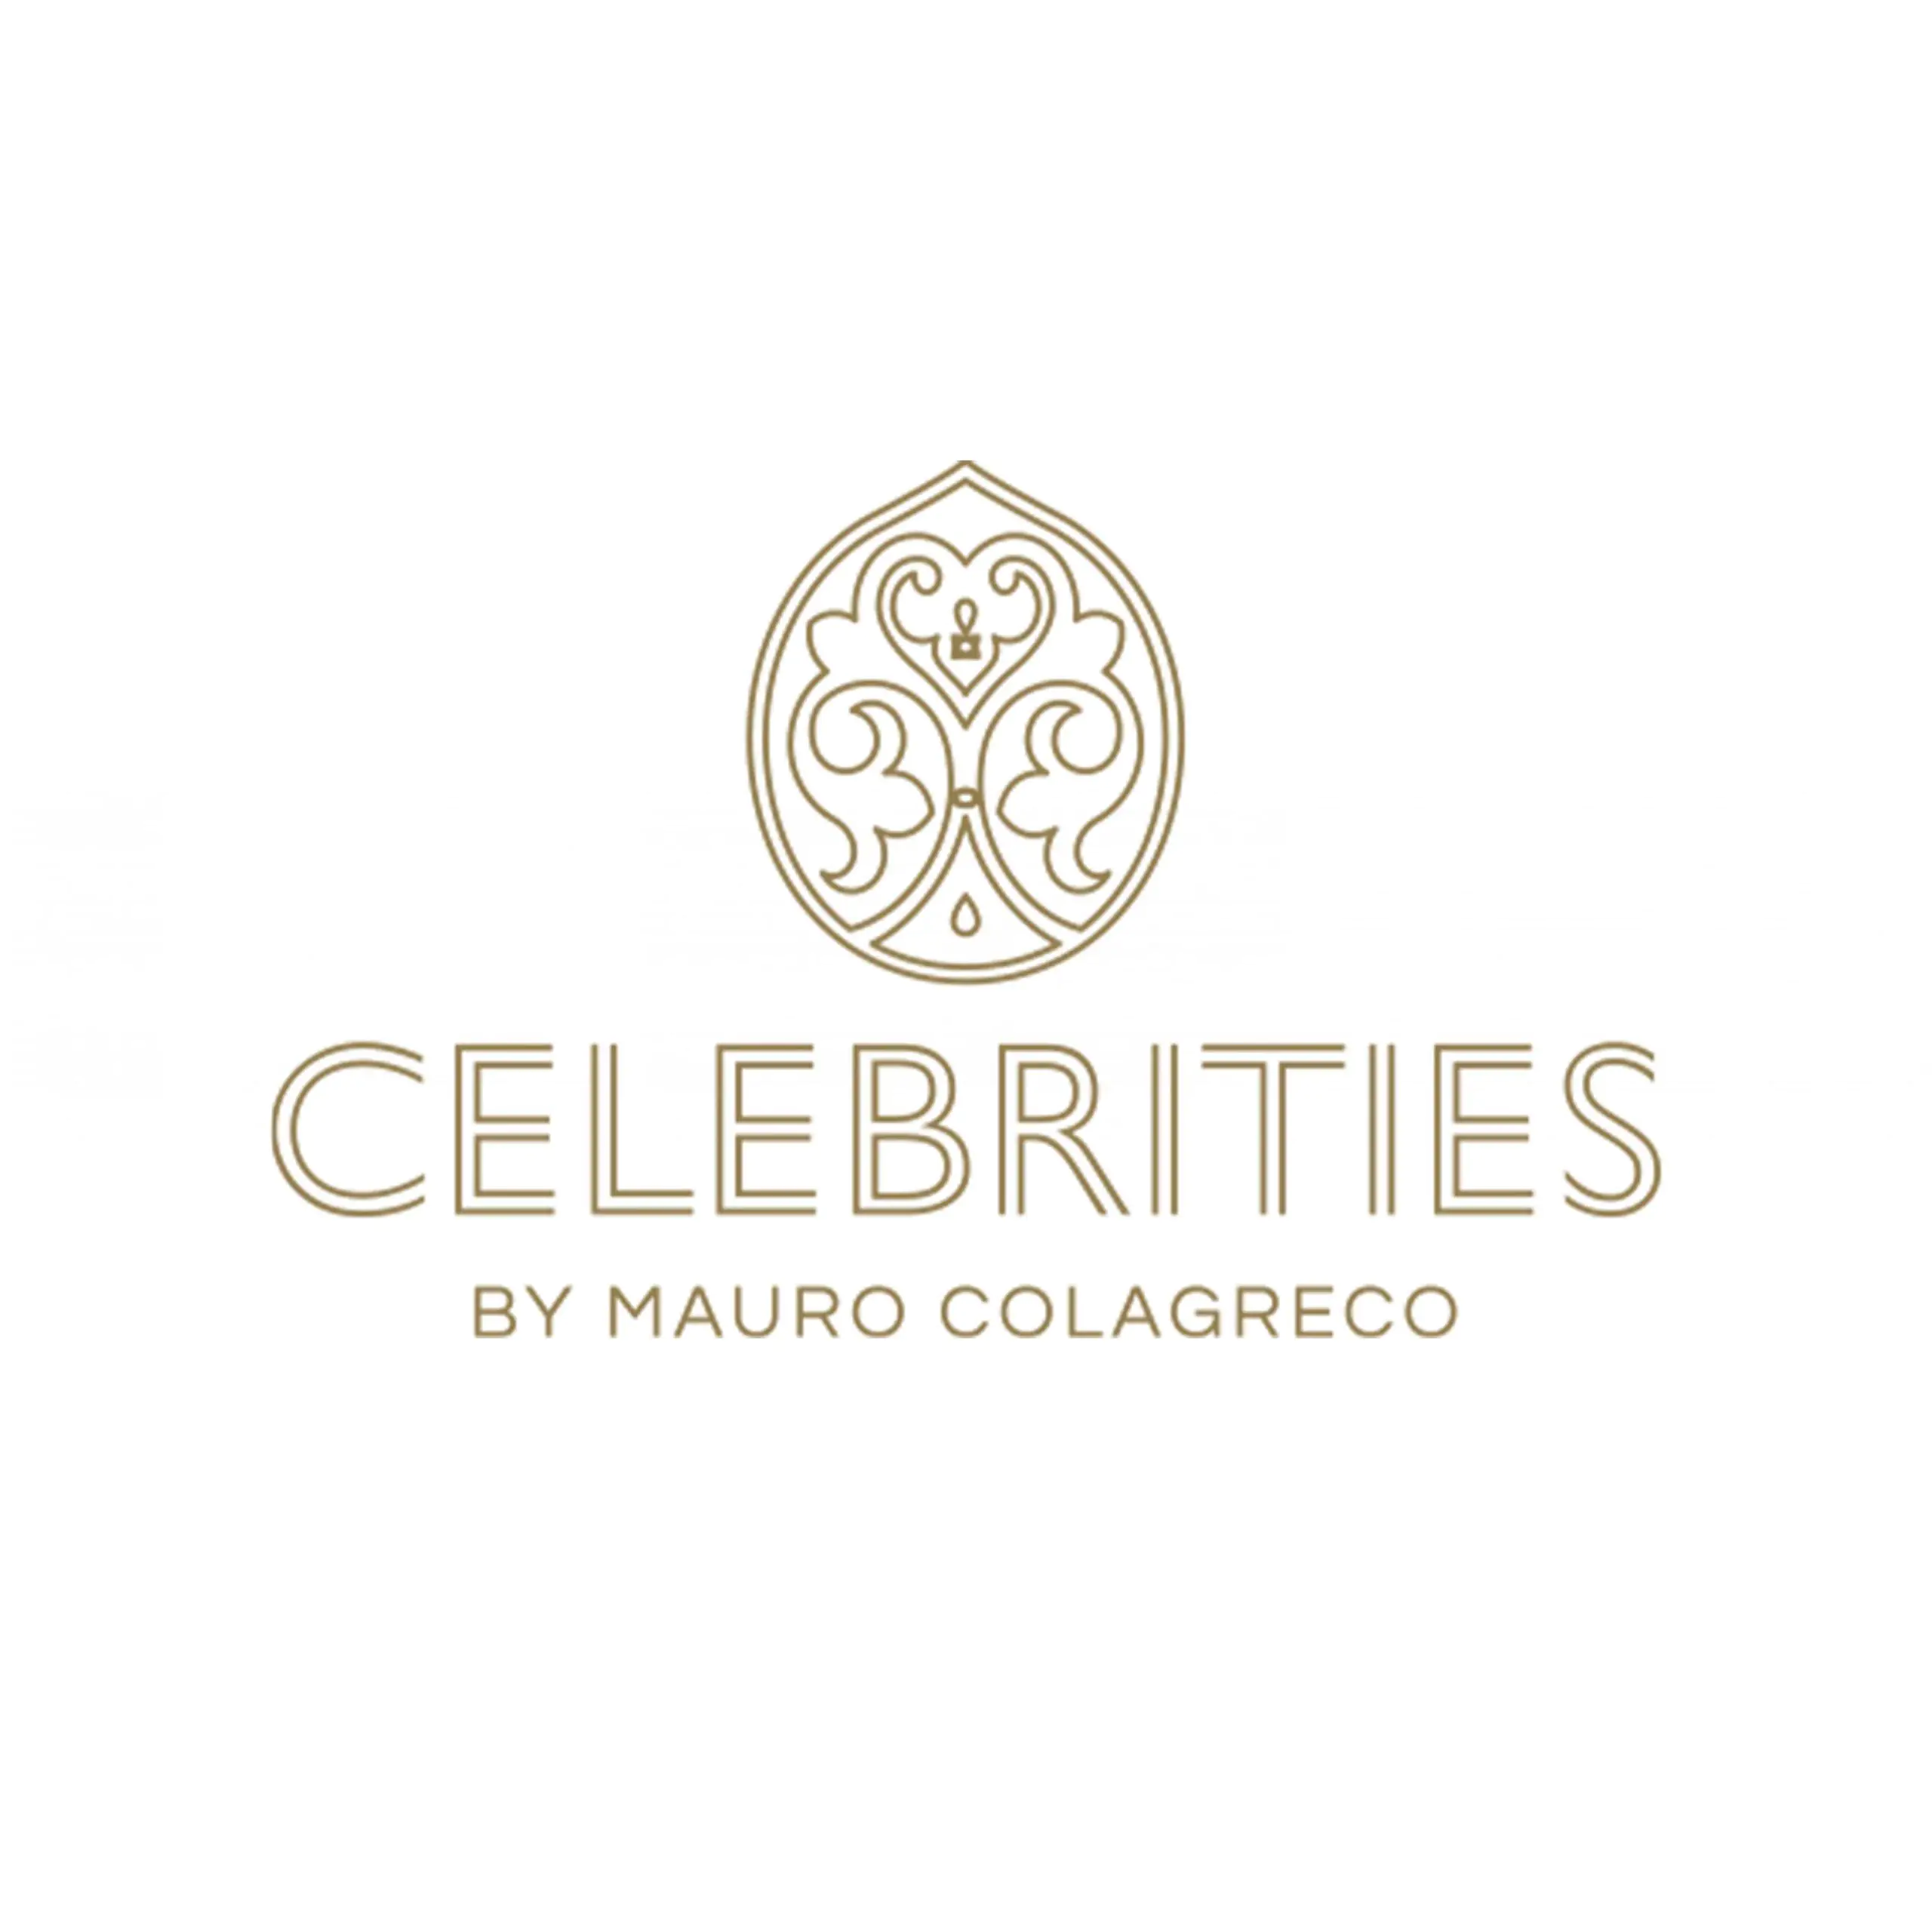 Celebrities by Mauro Colagreco - Coming Soon in UAE